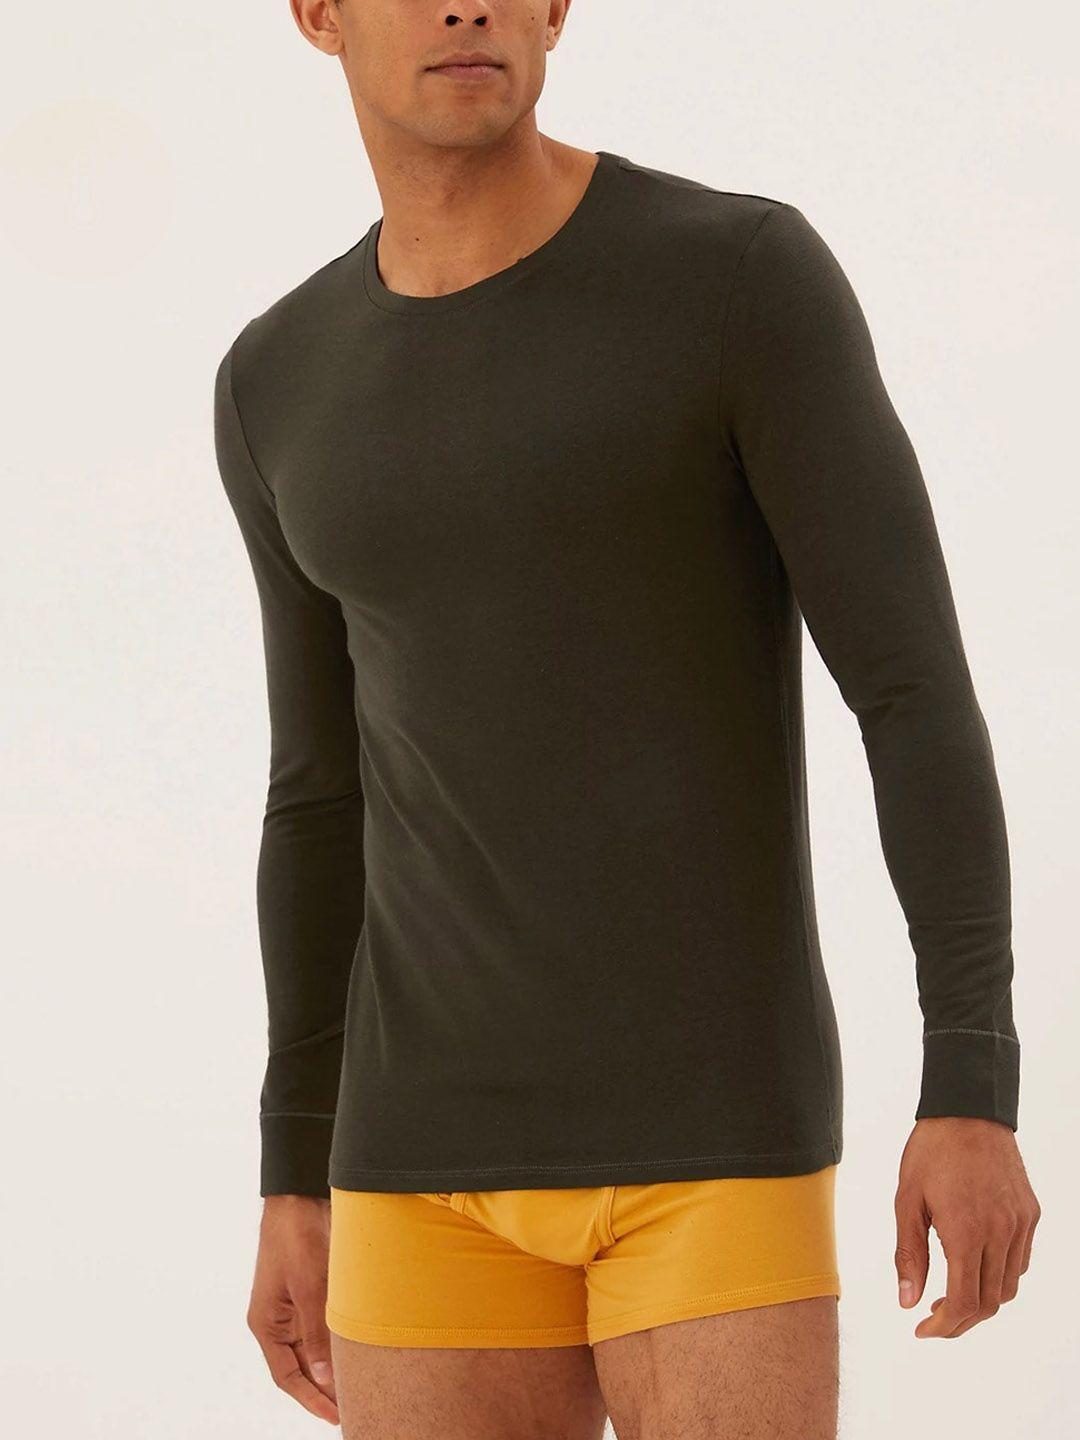 marks & spencer long sleeves thermal top